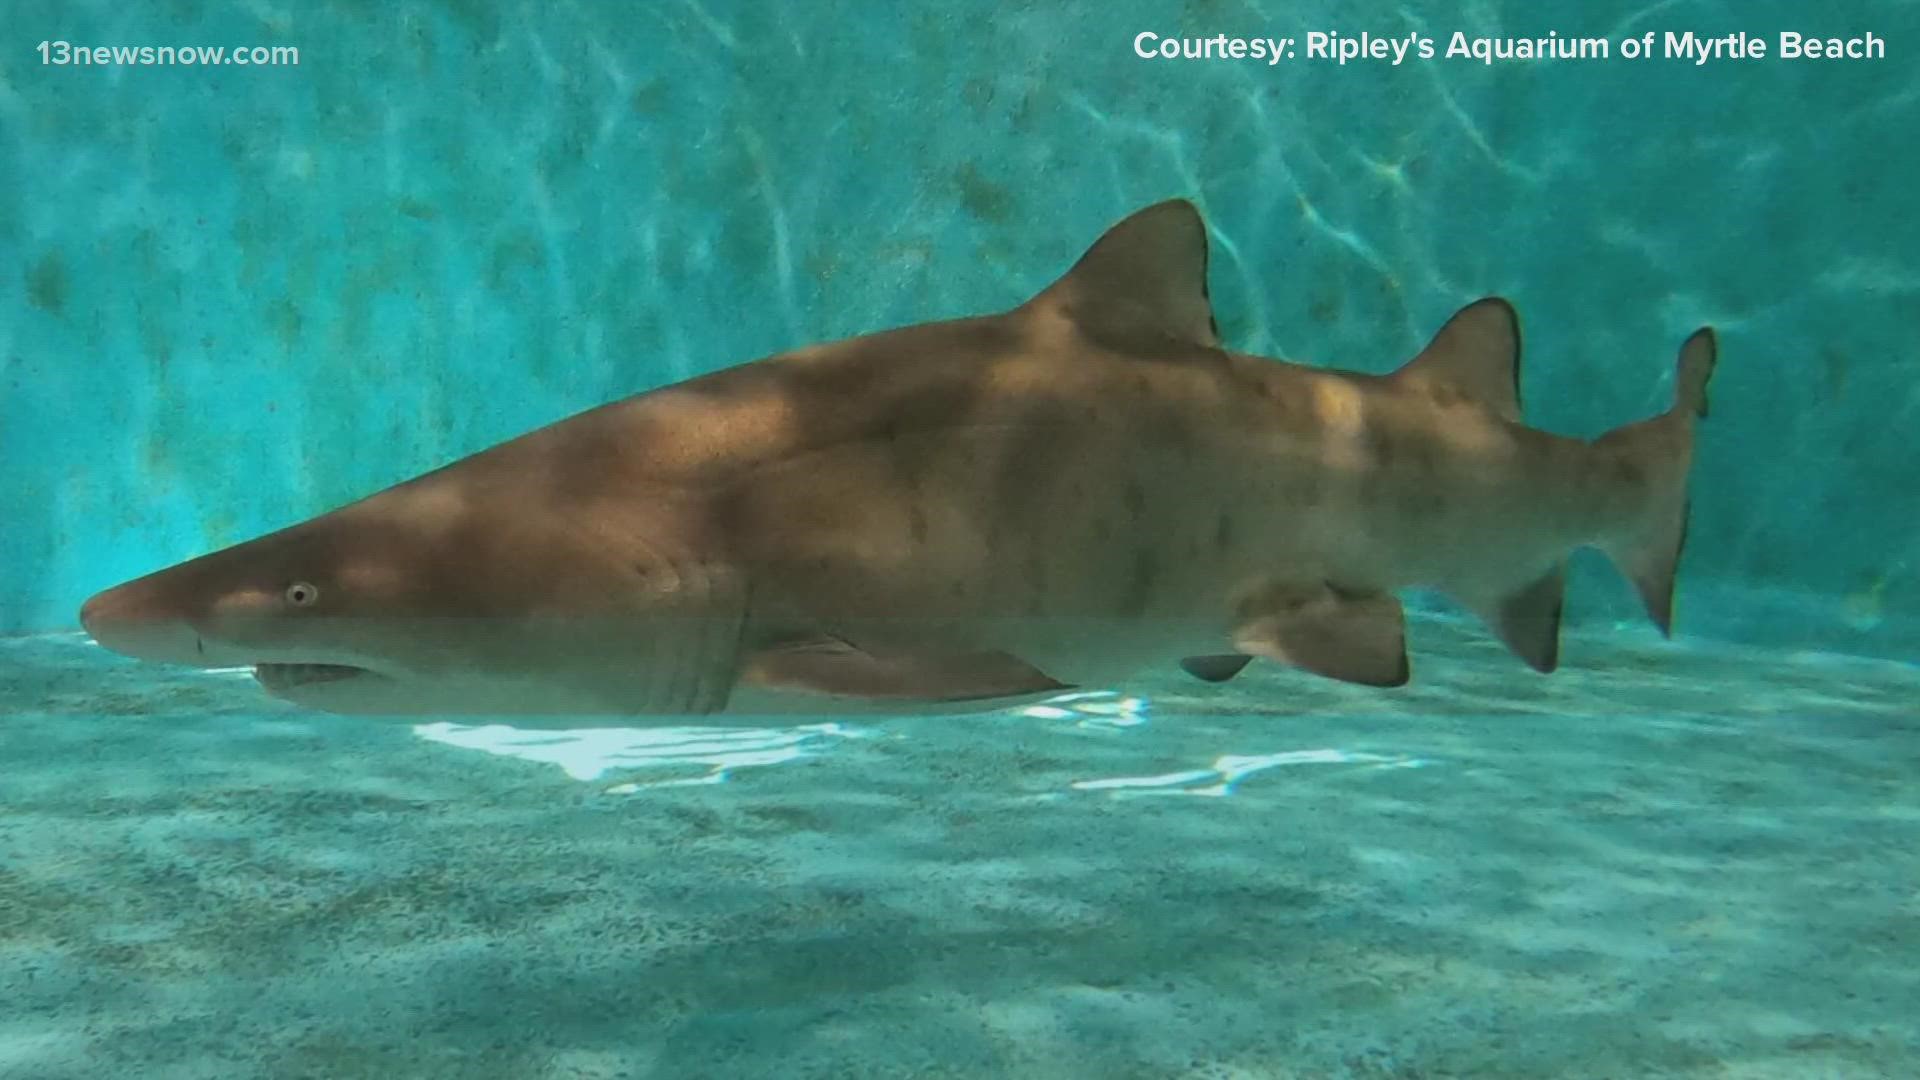 Baby Rip is making waves among marine biologists because sand tiger sharks are critically endangered. He's the first of his species to be born in captivity.